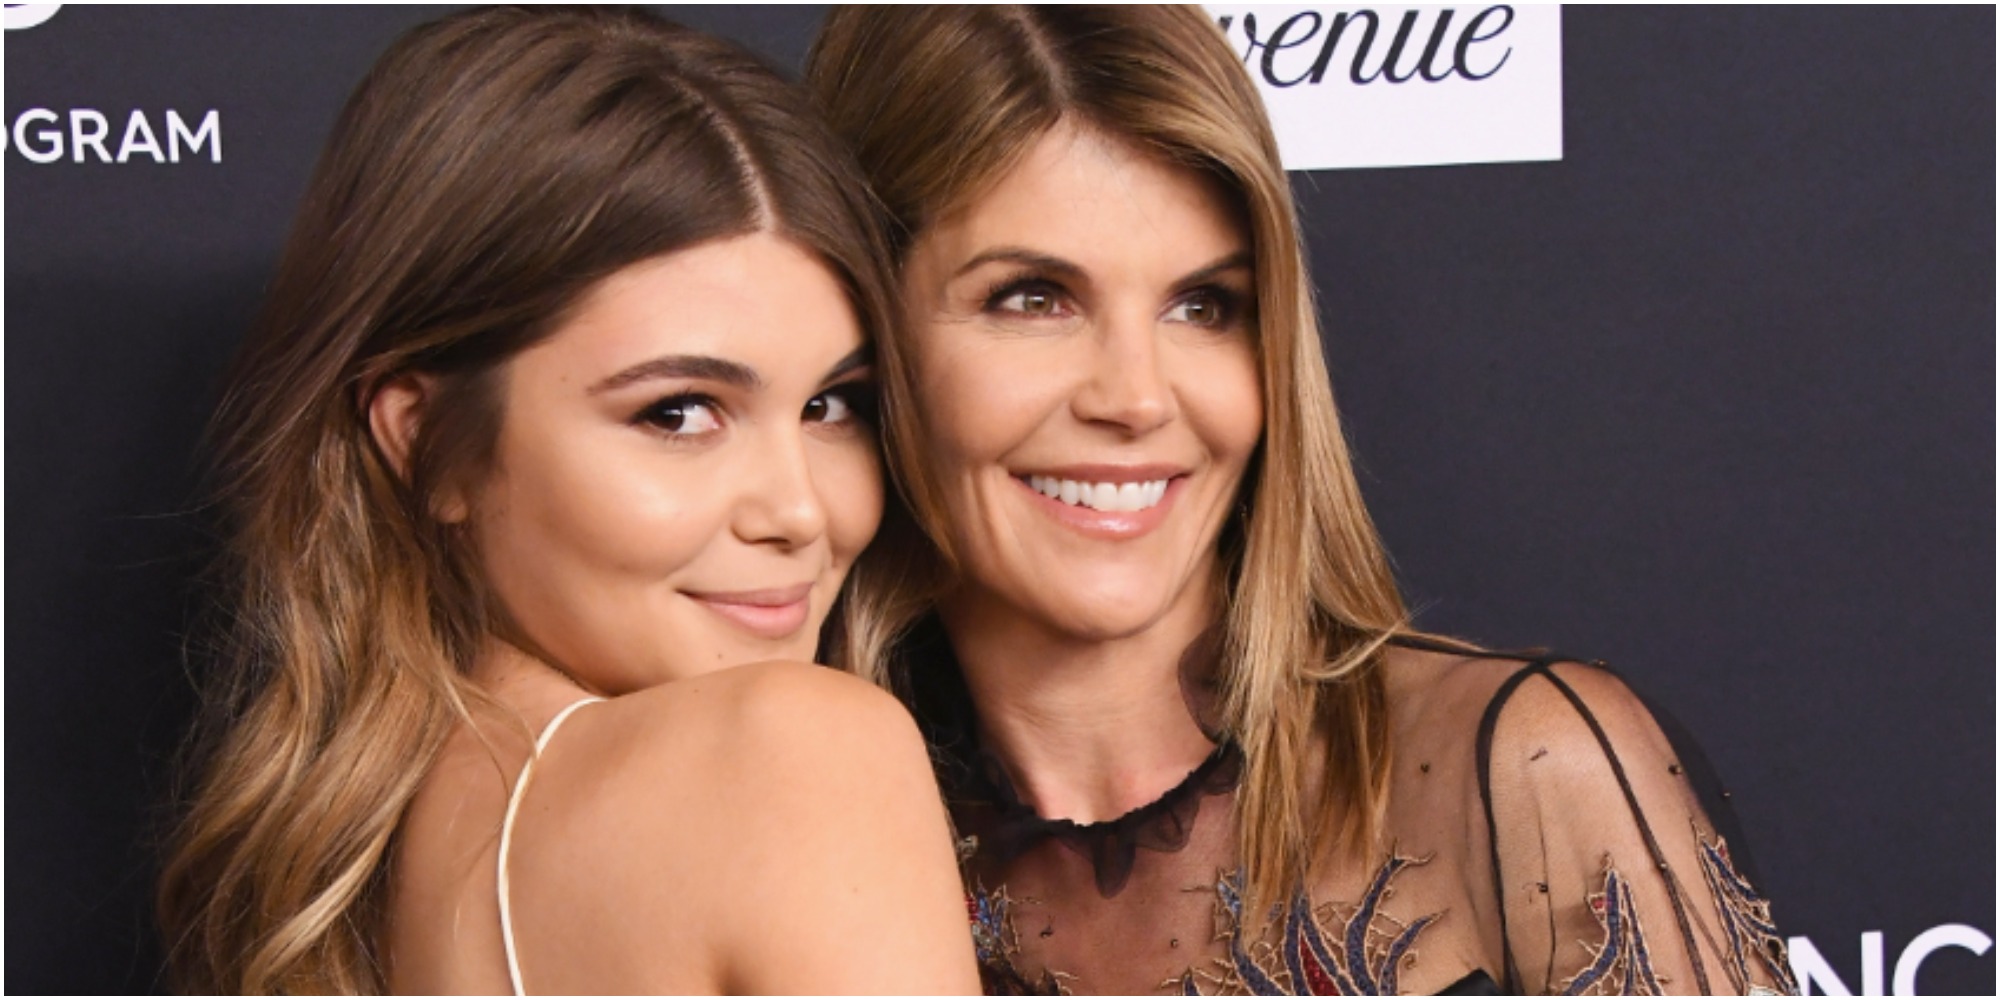 Olivia Jade and her mother Lori Loughlin, who were involved in the college admissions scandal.